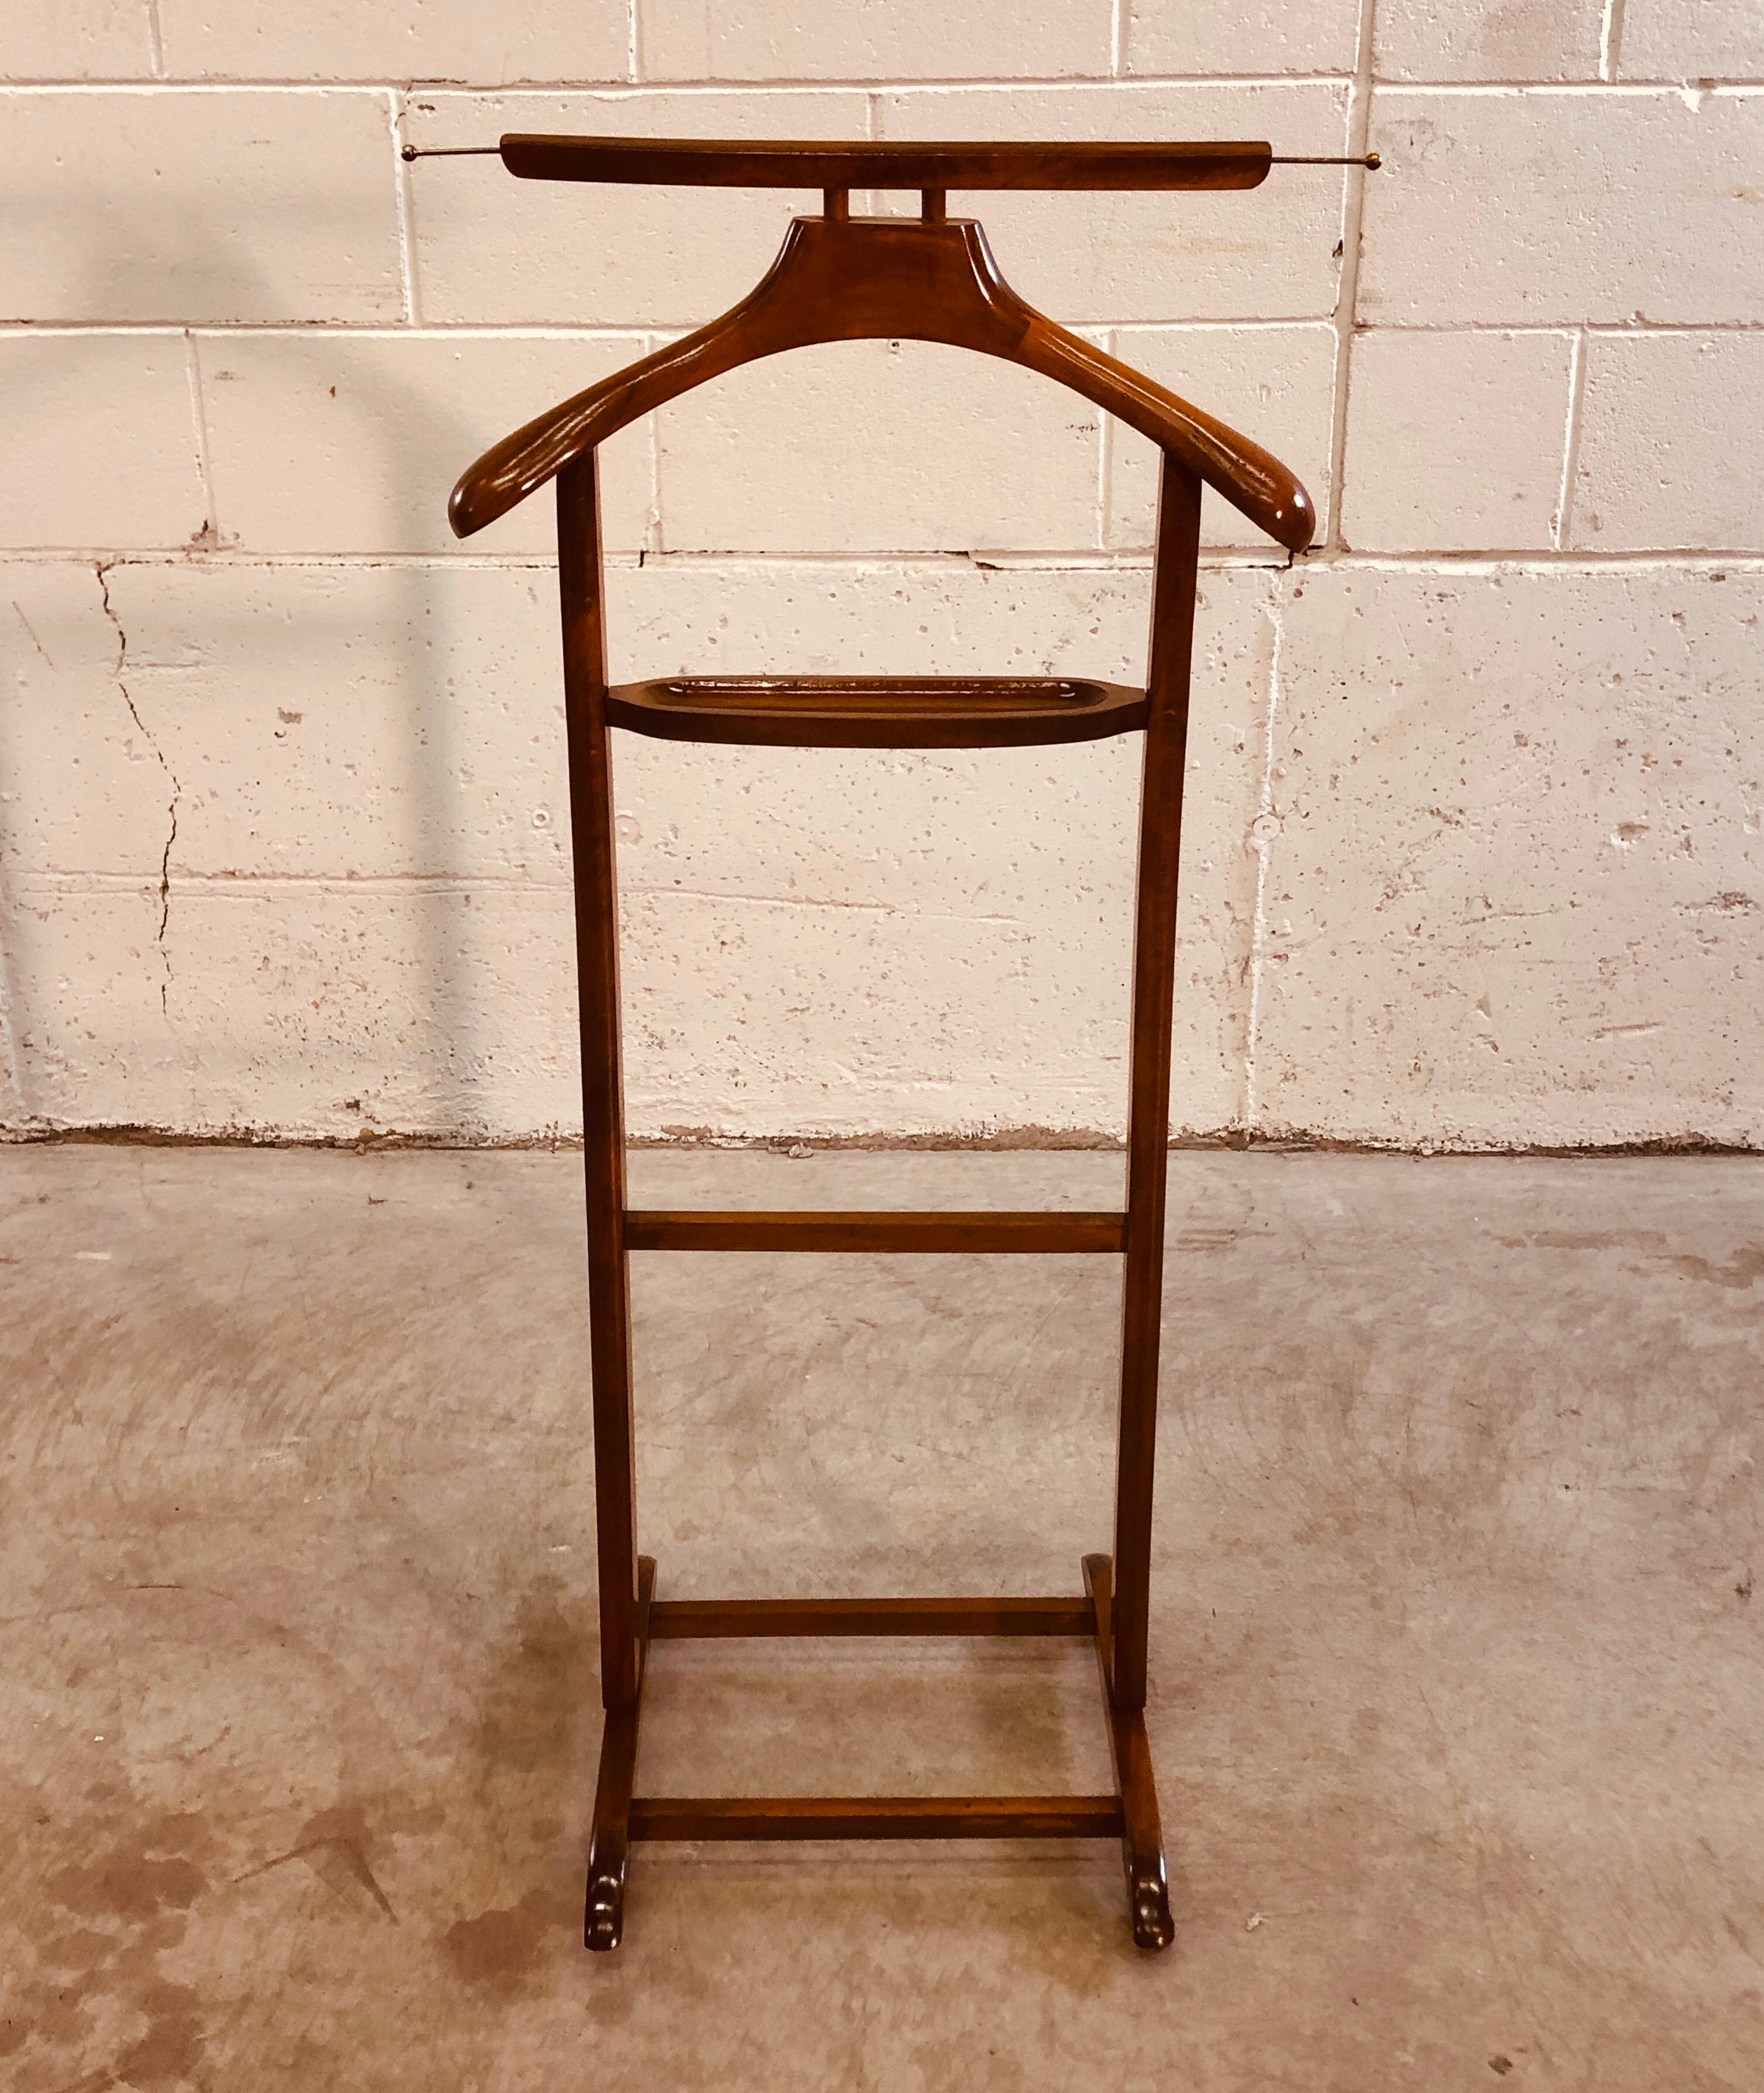 Vintage 1960s maple wood bedroom valet stand on wheels. The wood is a dark maple wood and has been refinished. No marks. Excellent condition.